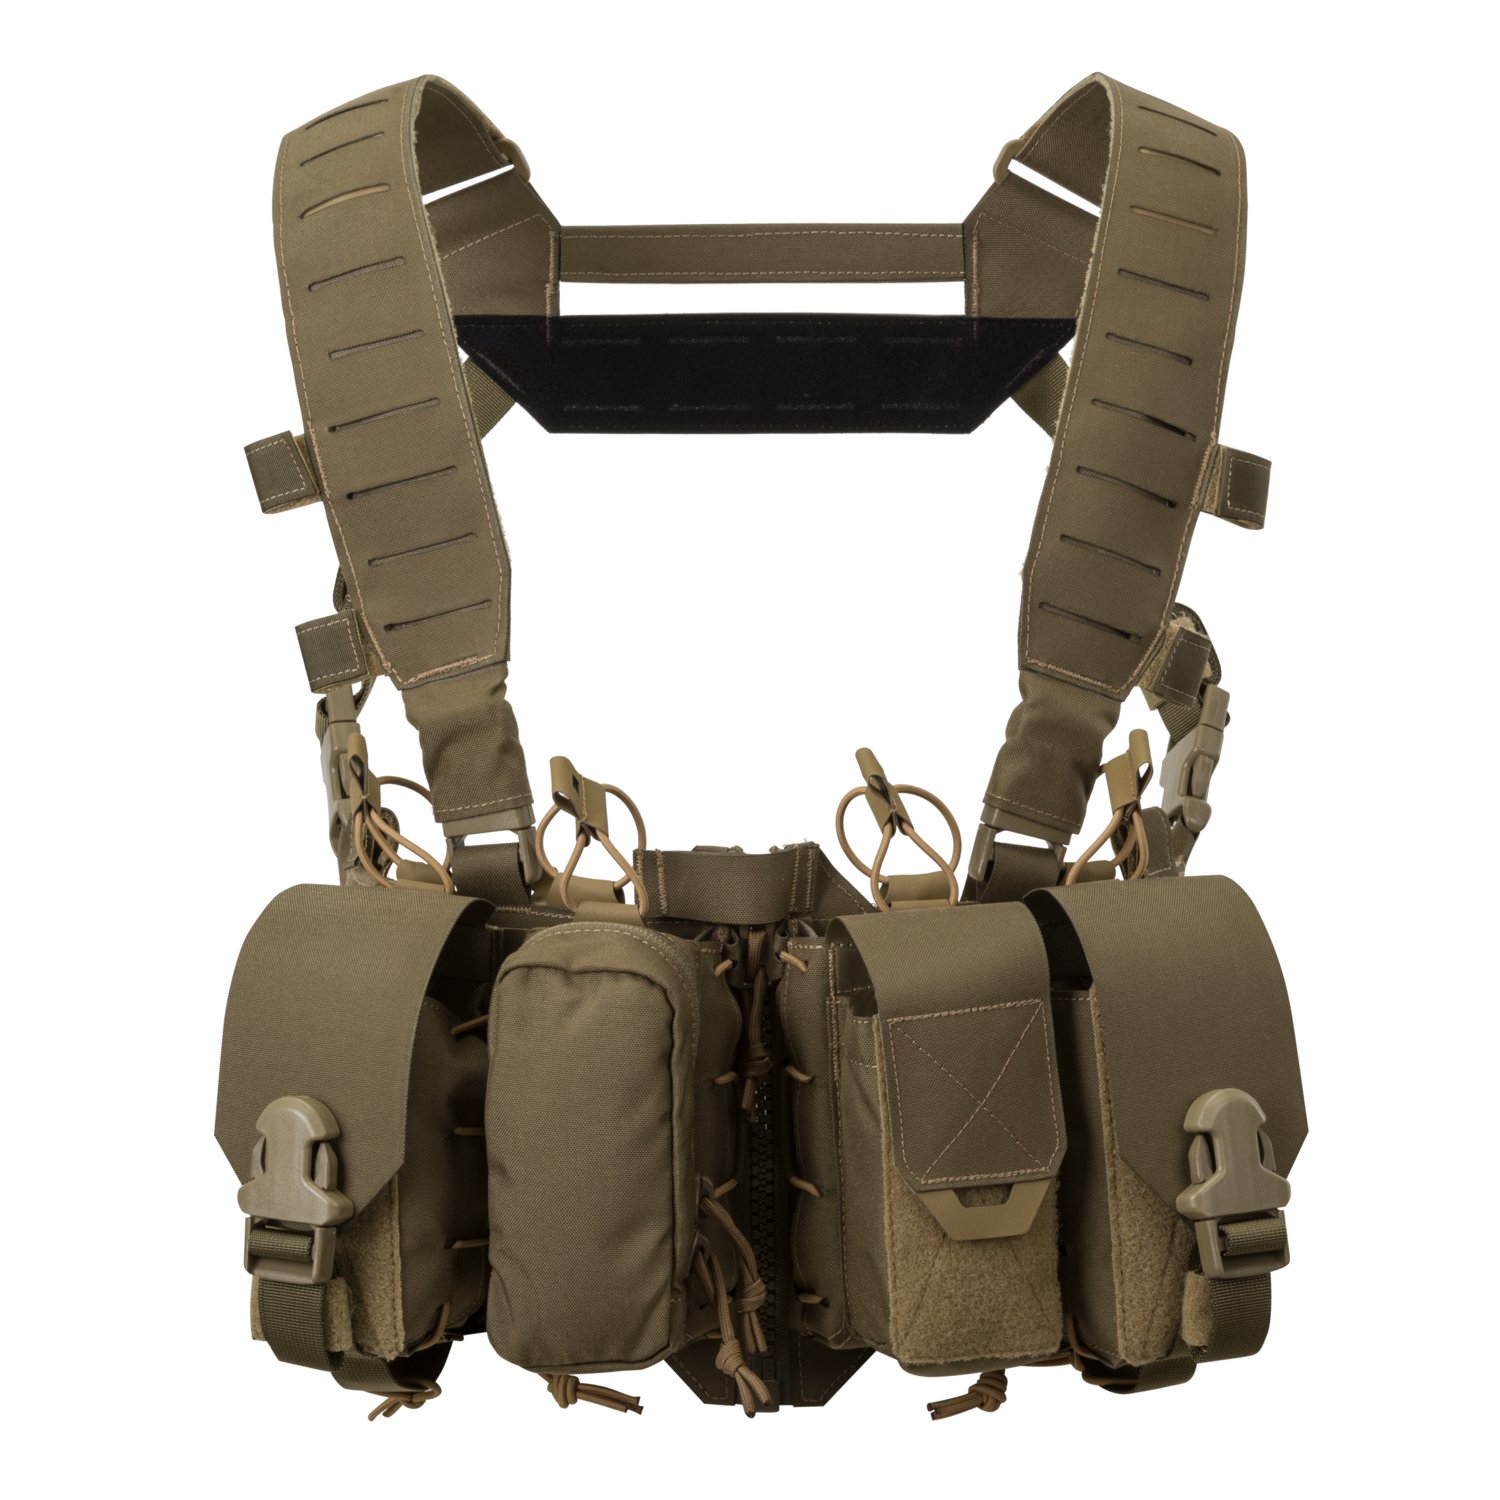 Hurricane Hybrid Chest Rig | On Duty Equipment Contract Division